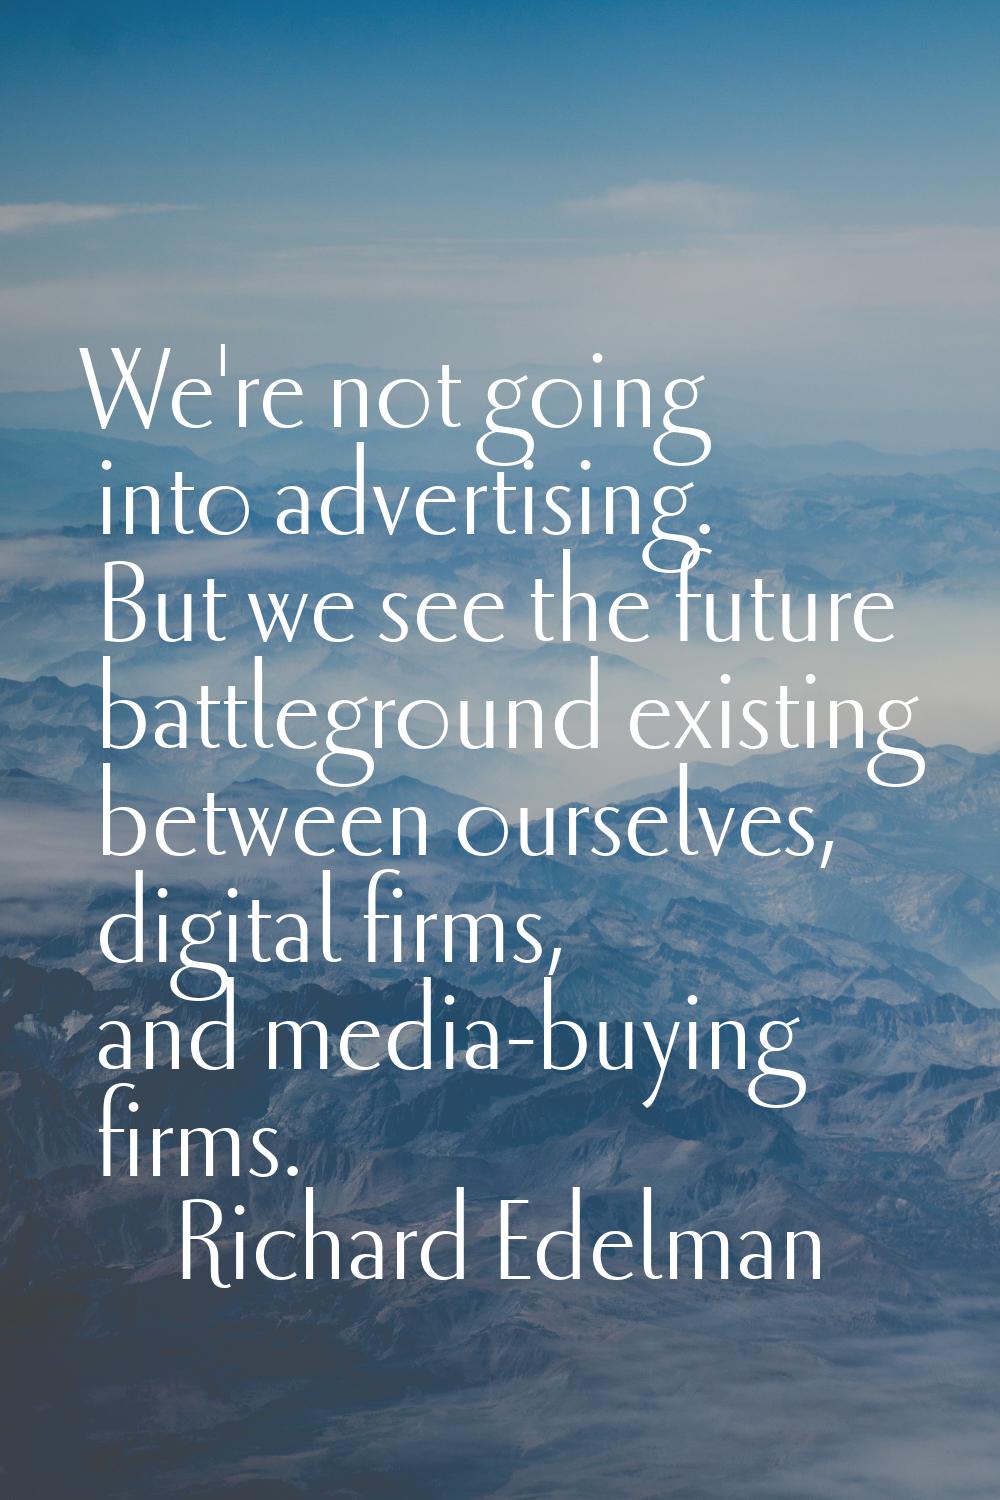 We're not going into advertising. But we see the future battleground existing between ourselves, di